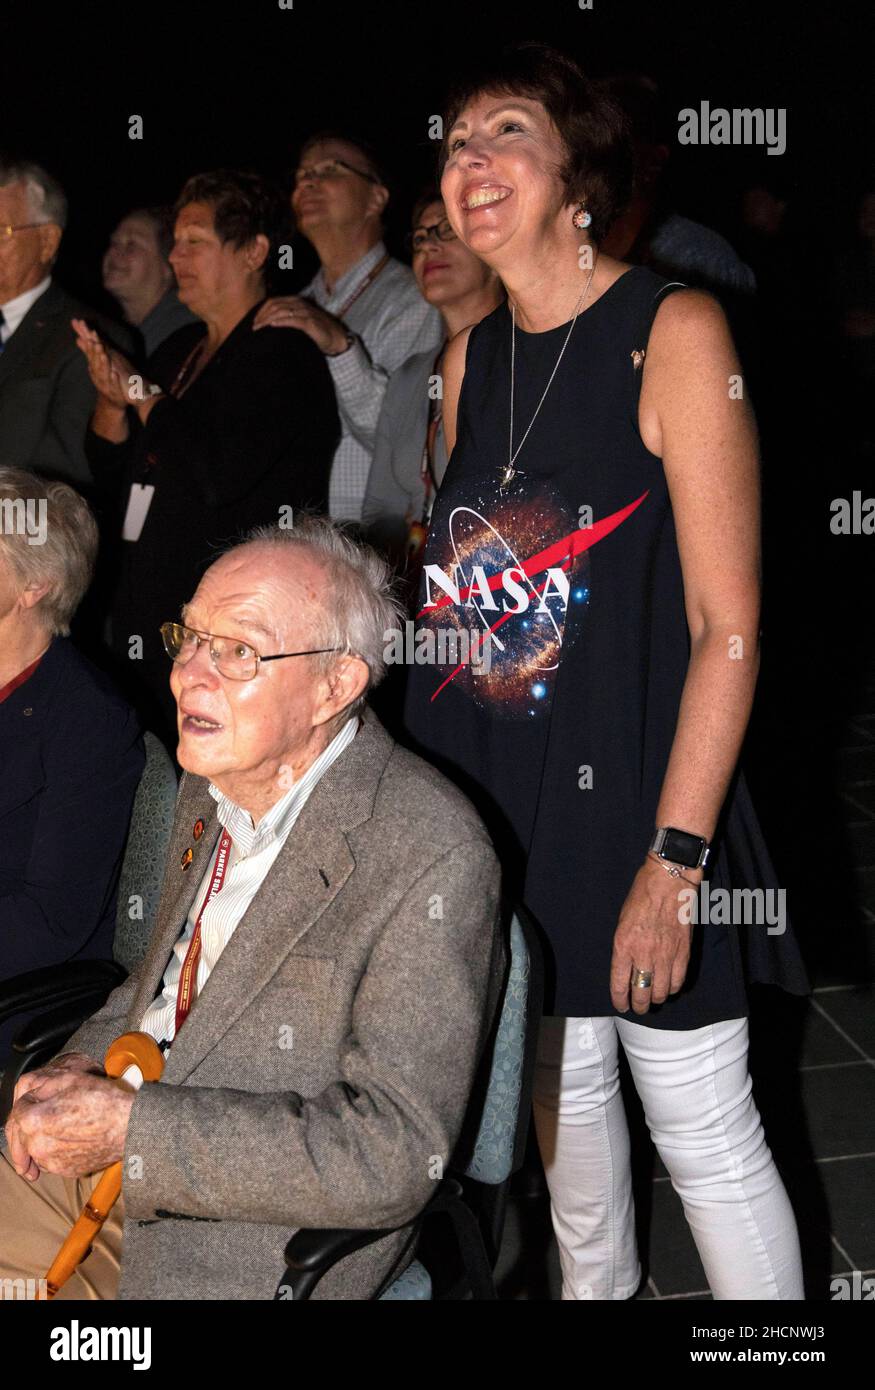 Usa. 12th Aug, 2018. Dr. EUGENE PARKER (seated in the foreground), a pioneer in heliophysics and S. Chandrasekhar distinguished service professor emeritus for the Department of Astronomy and Astrophysics at the University of Chicago, watches the launch of NASA's Parker Solar Probe. This is the first agency mission named for a living person. Standing behind Parker is Nicky Fox, Parker Solar Probe project scientist at Johns Hopkins Applied Physics Laboratory. The liftoff took place at 3:31 a.m. EDT on Sunday, Aug. 12, 2018. The spacecraft was built by the Johns Hopkins University Applied Phys Stock Photo